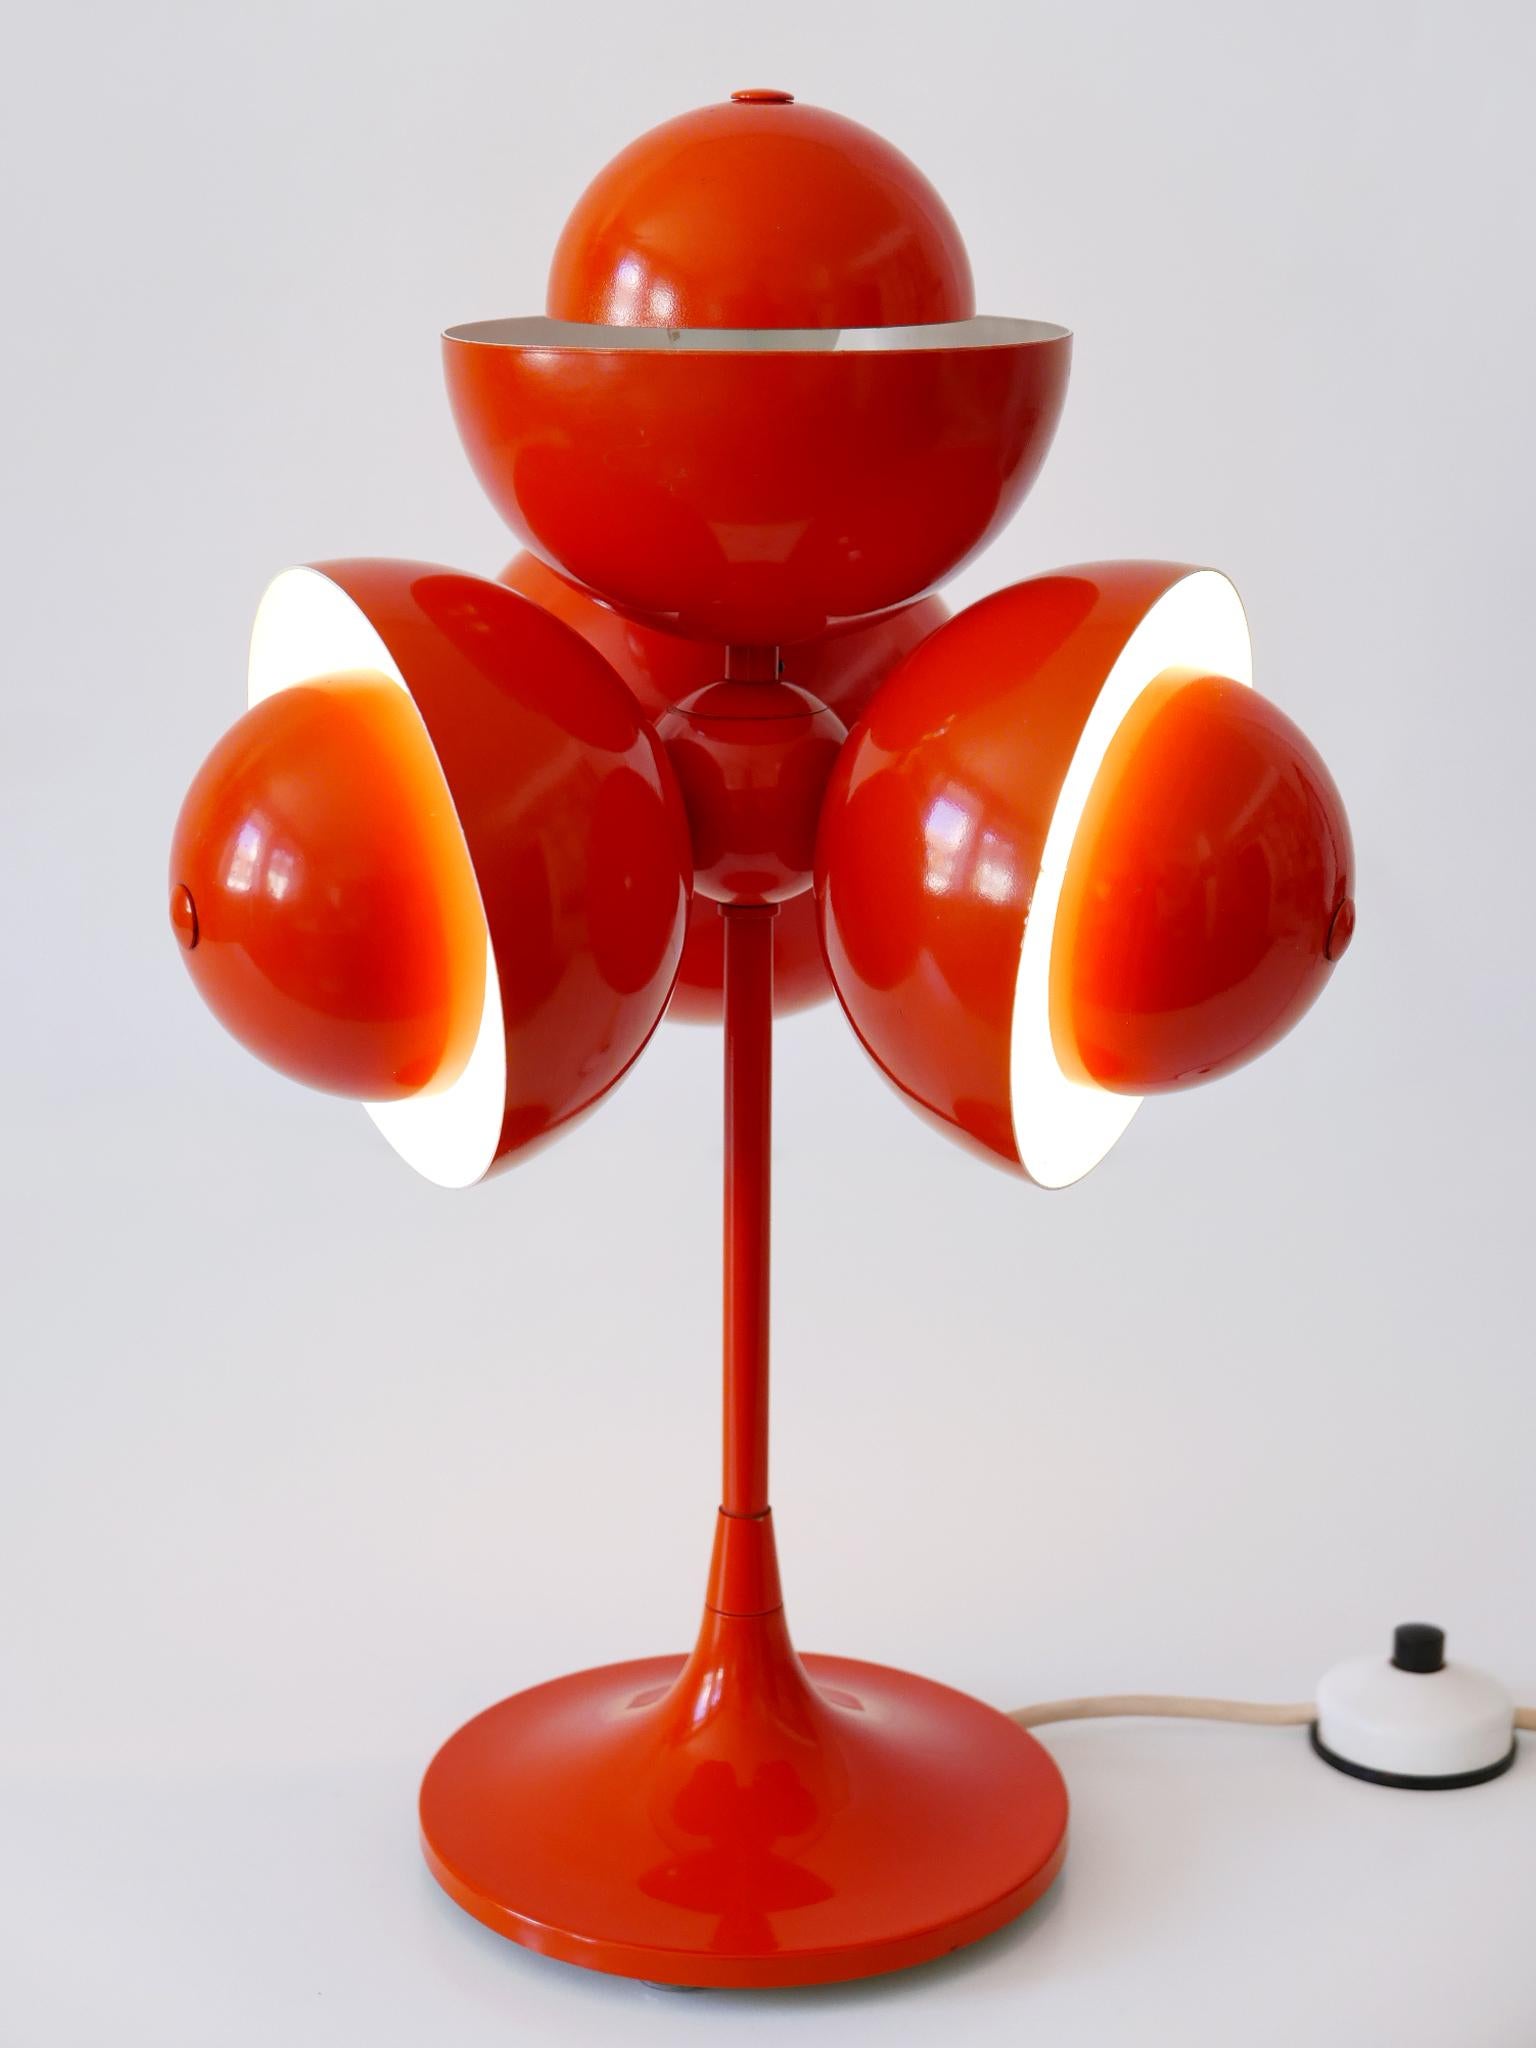 Exceptional & Lovely Mid-Century Modern Flowerpot Table Lamp, Germany, 1970s For Sale 1